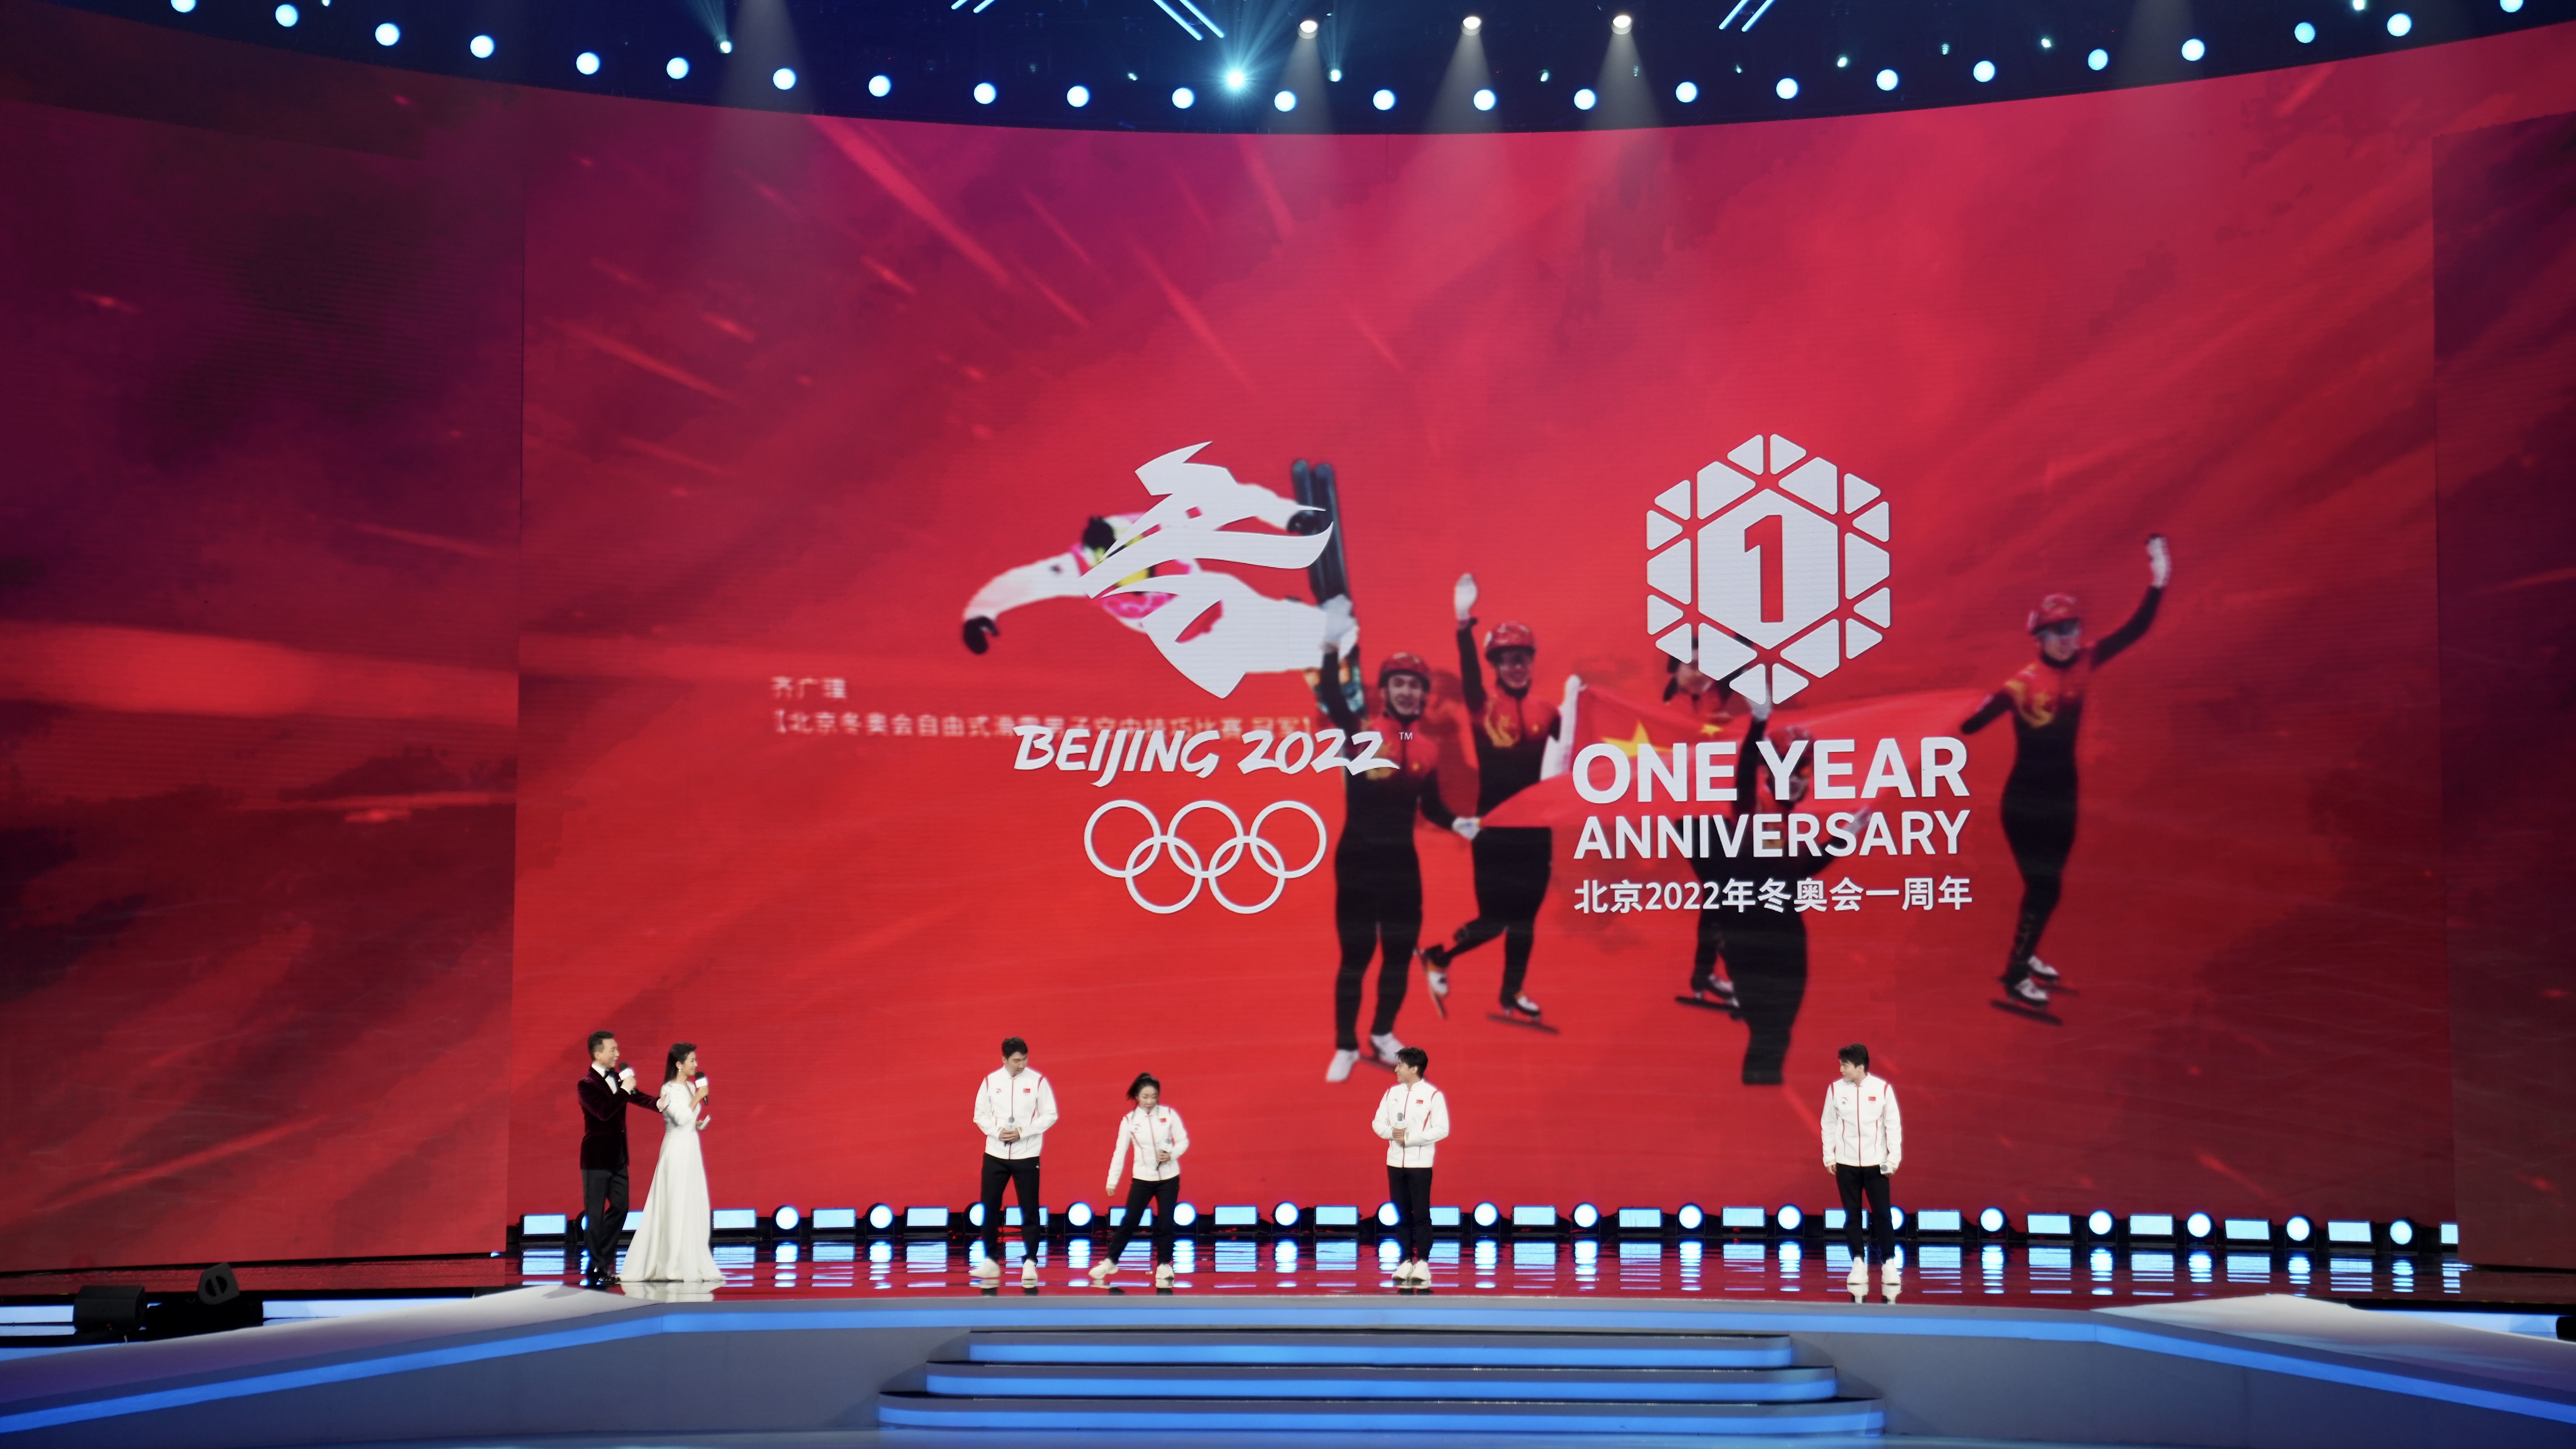 Beijing 2022 participants at the ceremony marking the first anniversary of Beijing 2022 Winter Olympic Games in Beijing, China, February 4, 2023. /CGTN